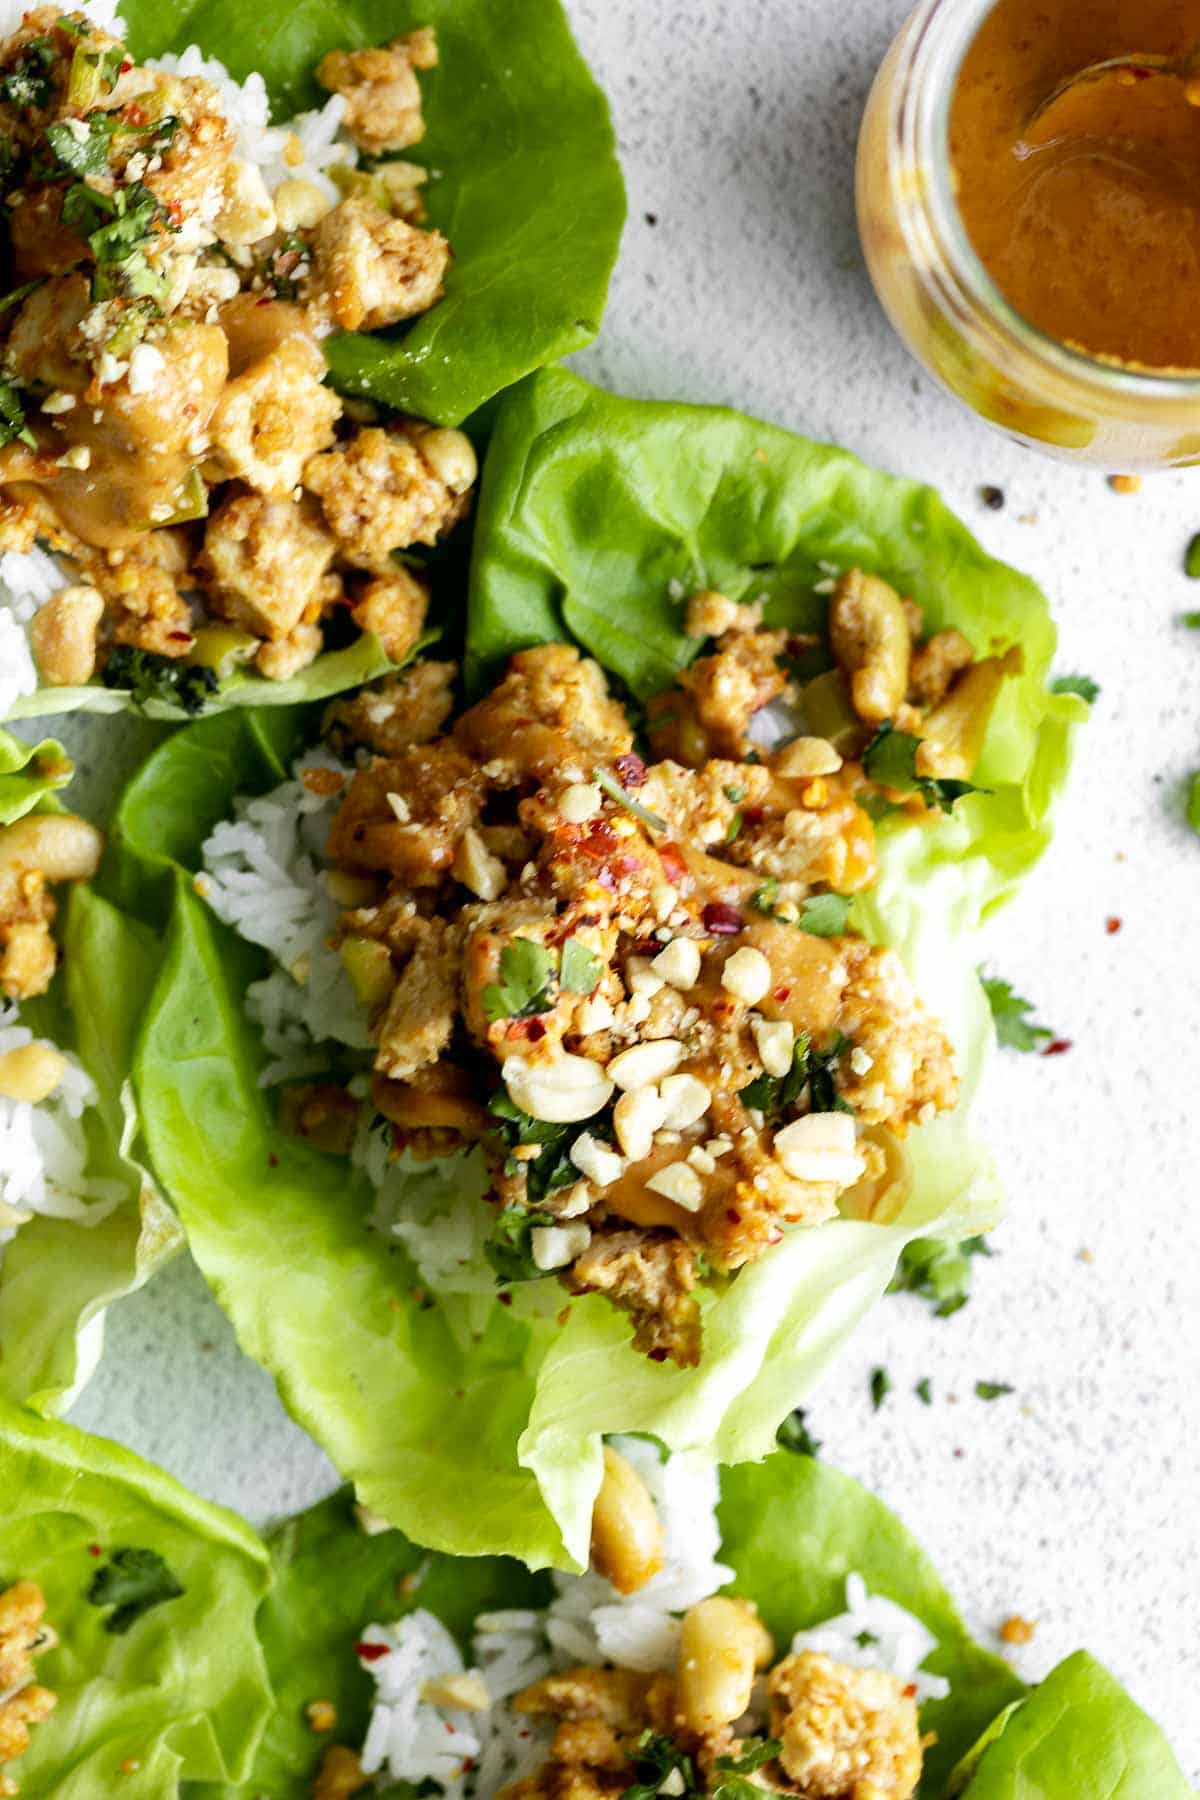 vegan lettuce wraps with peanut sauce on the side